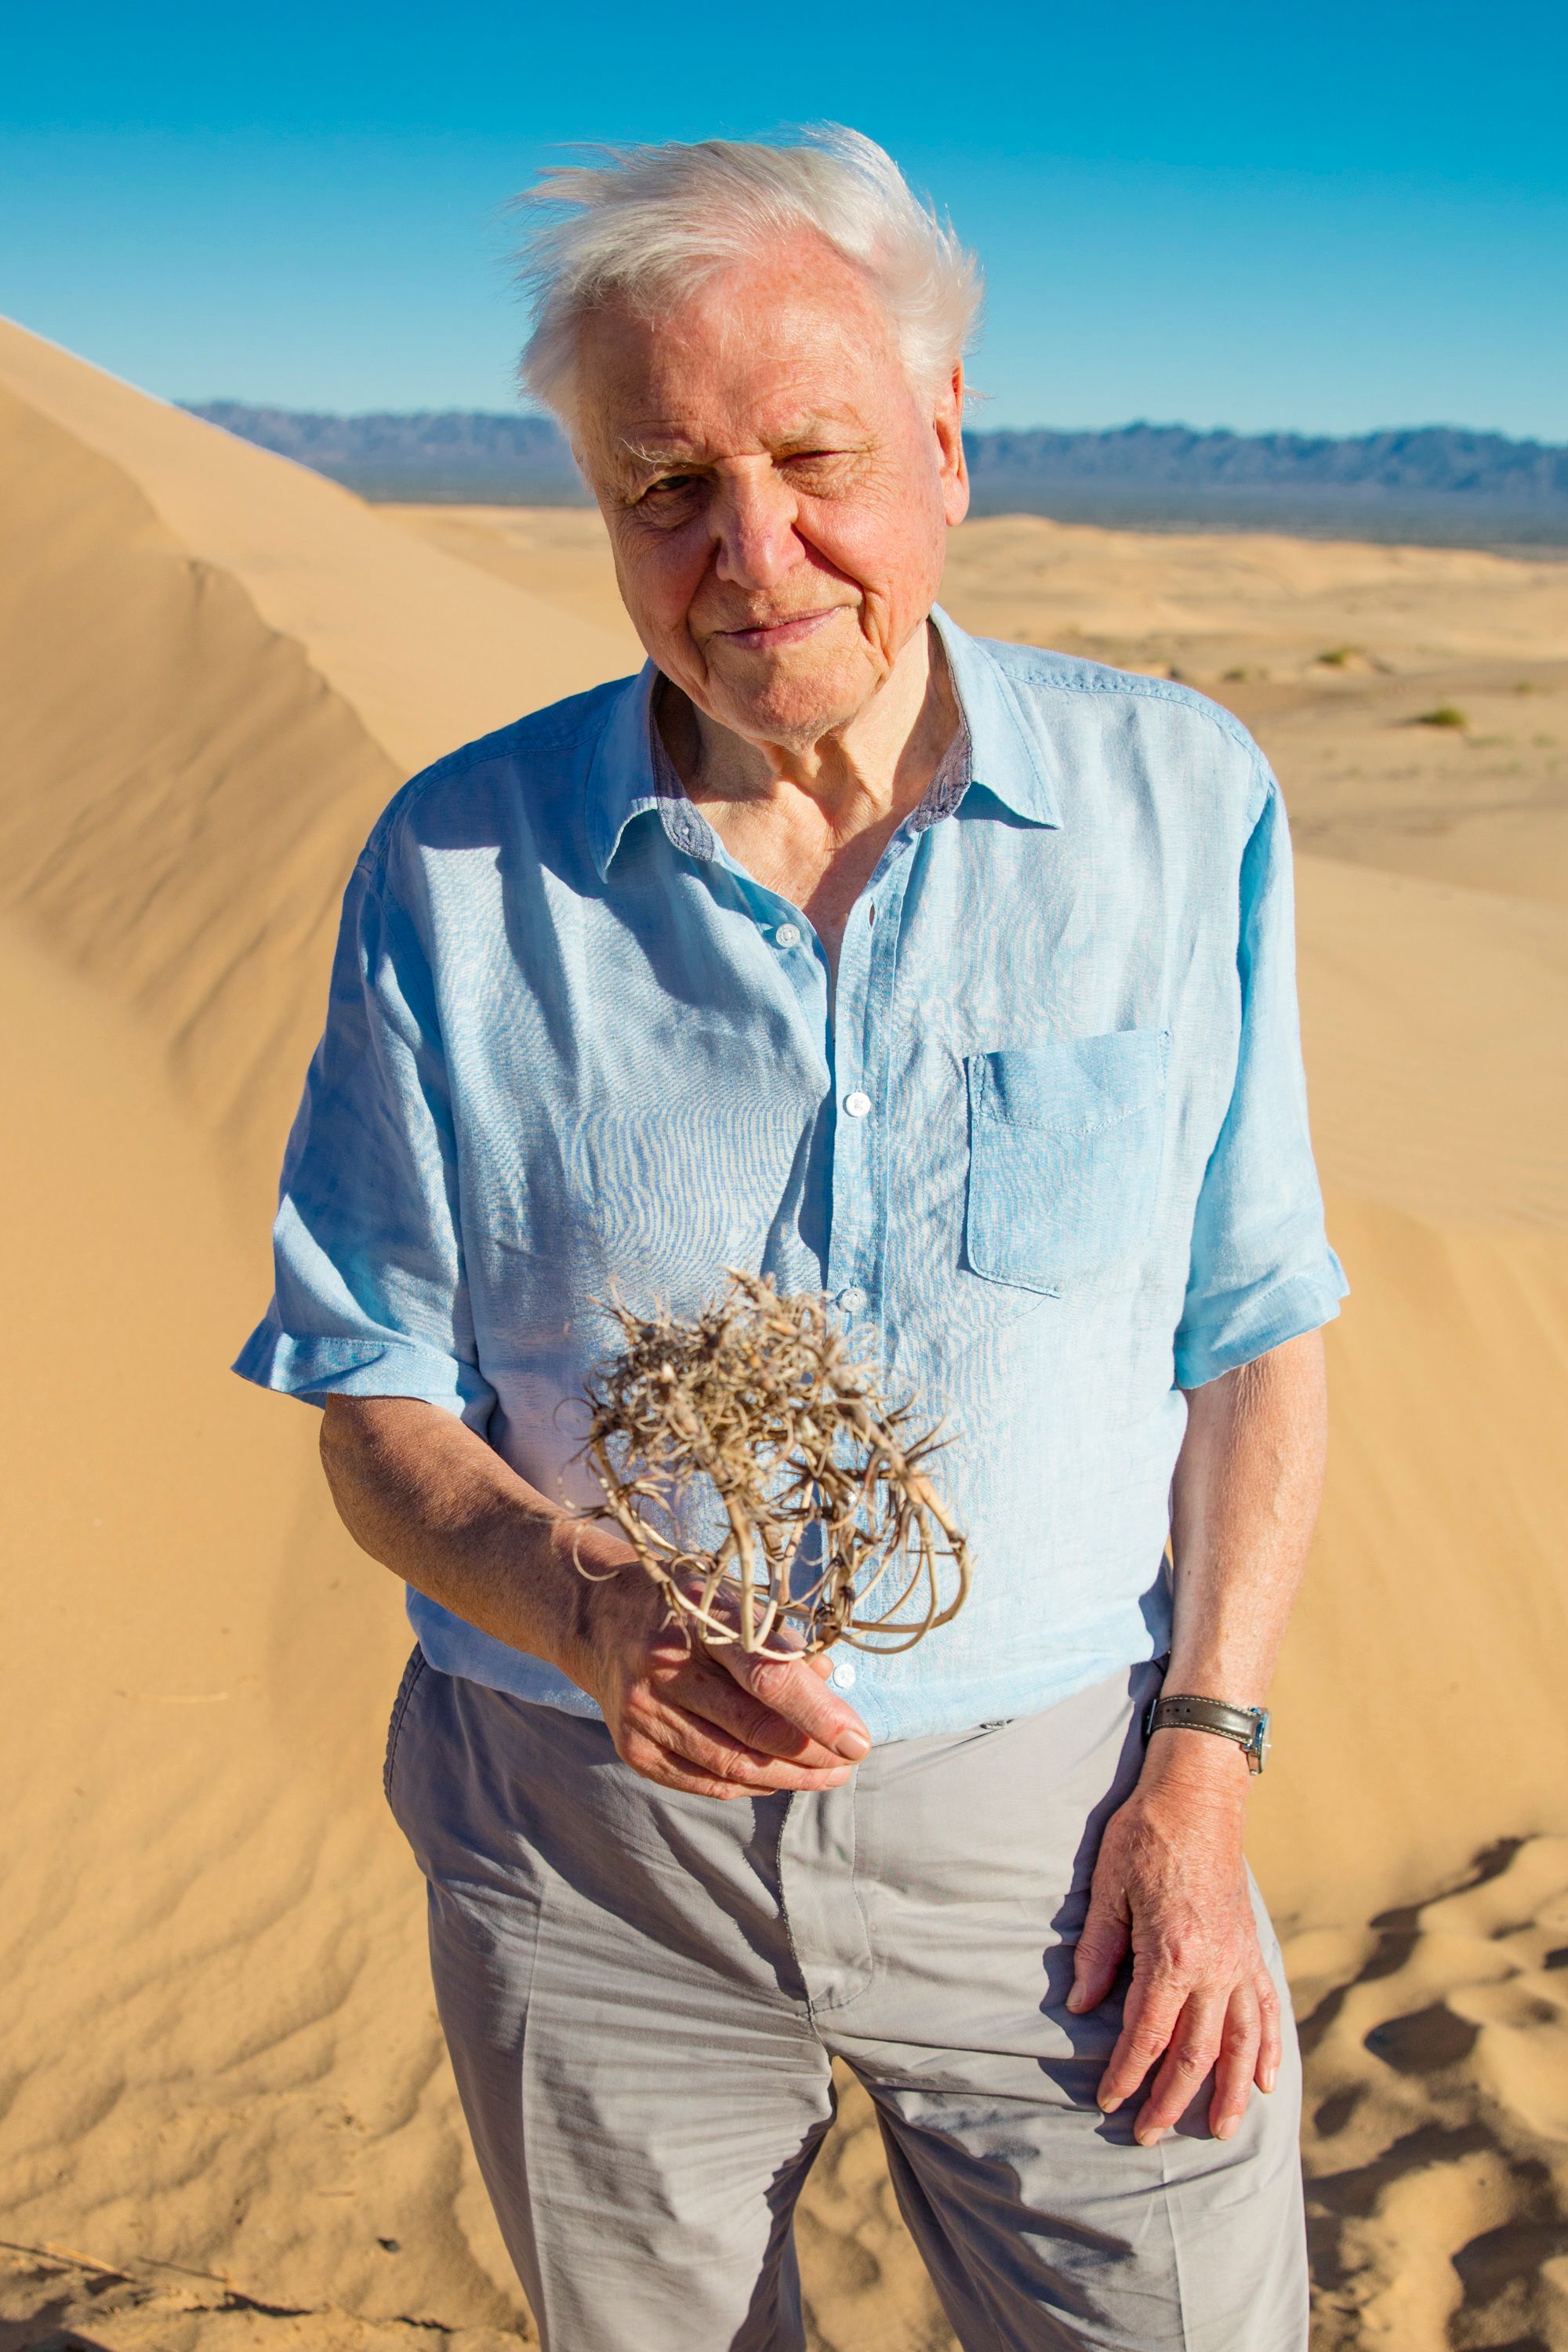 Sir David Attenborough opens up on The Green Planet show